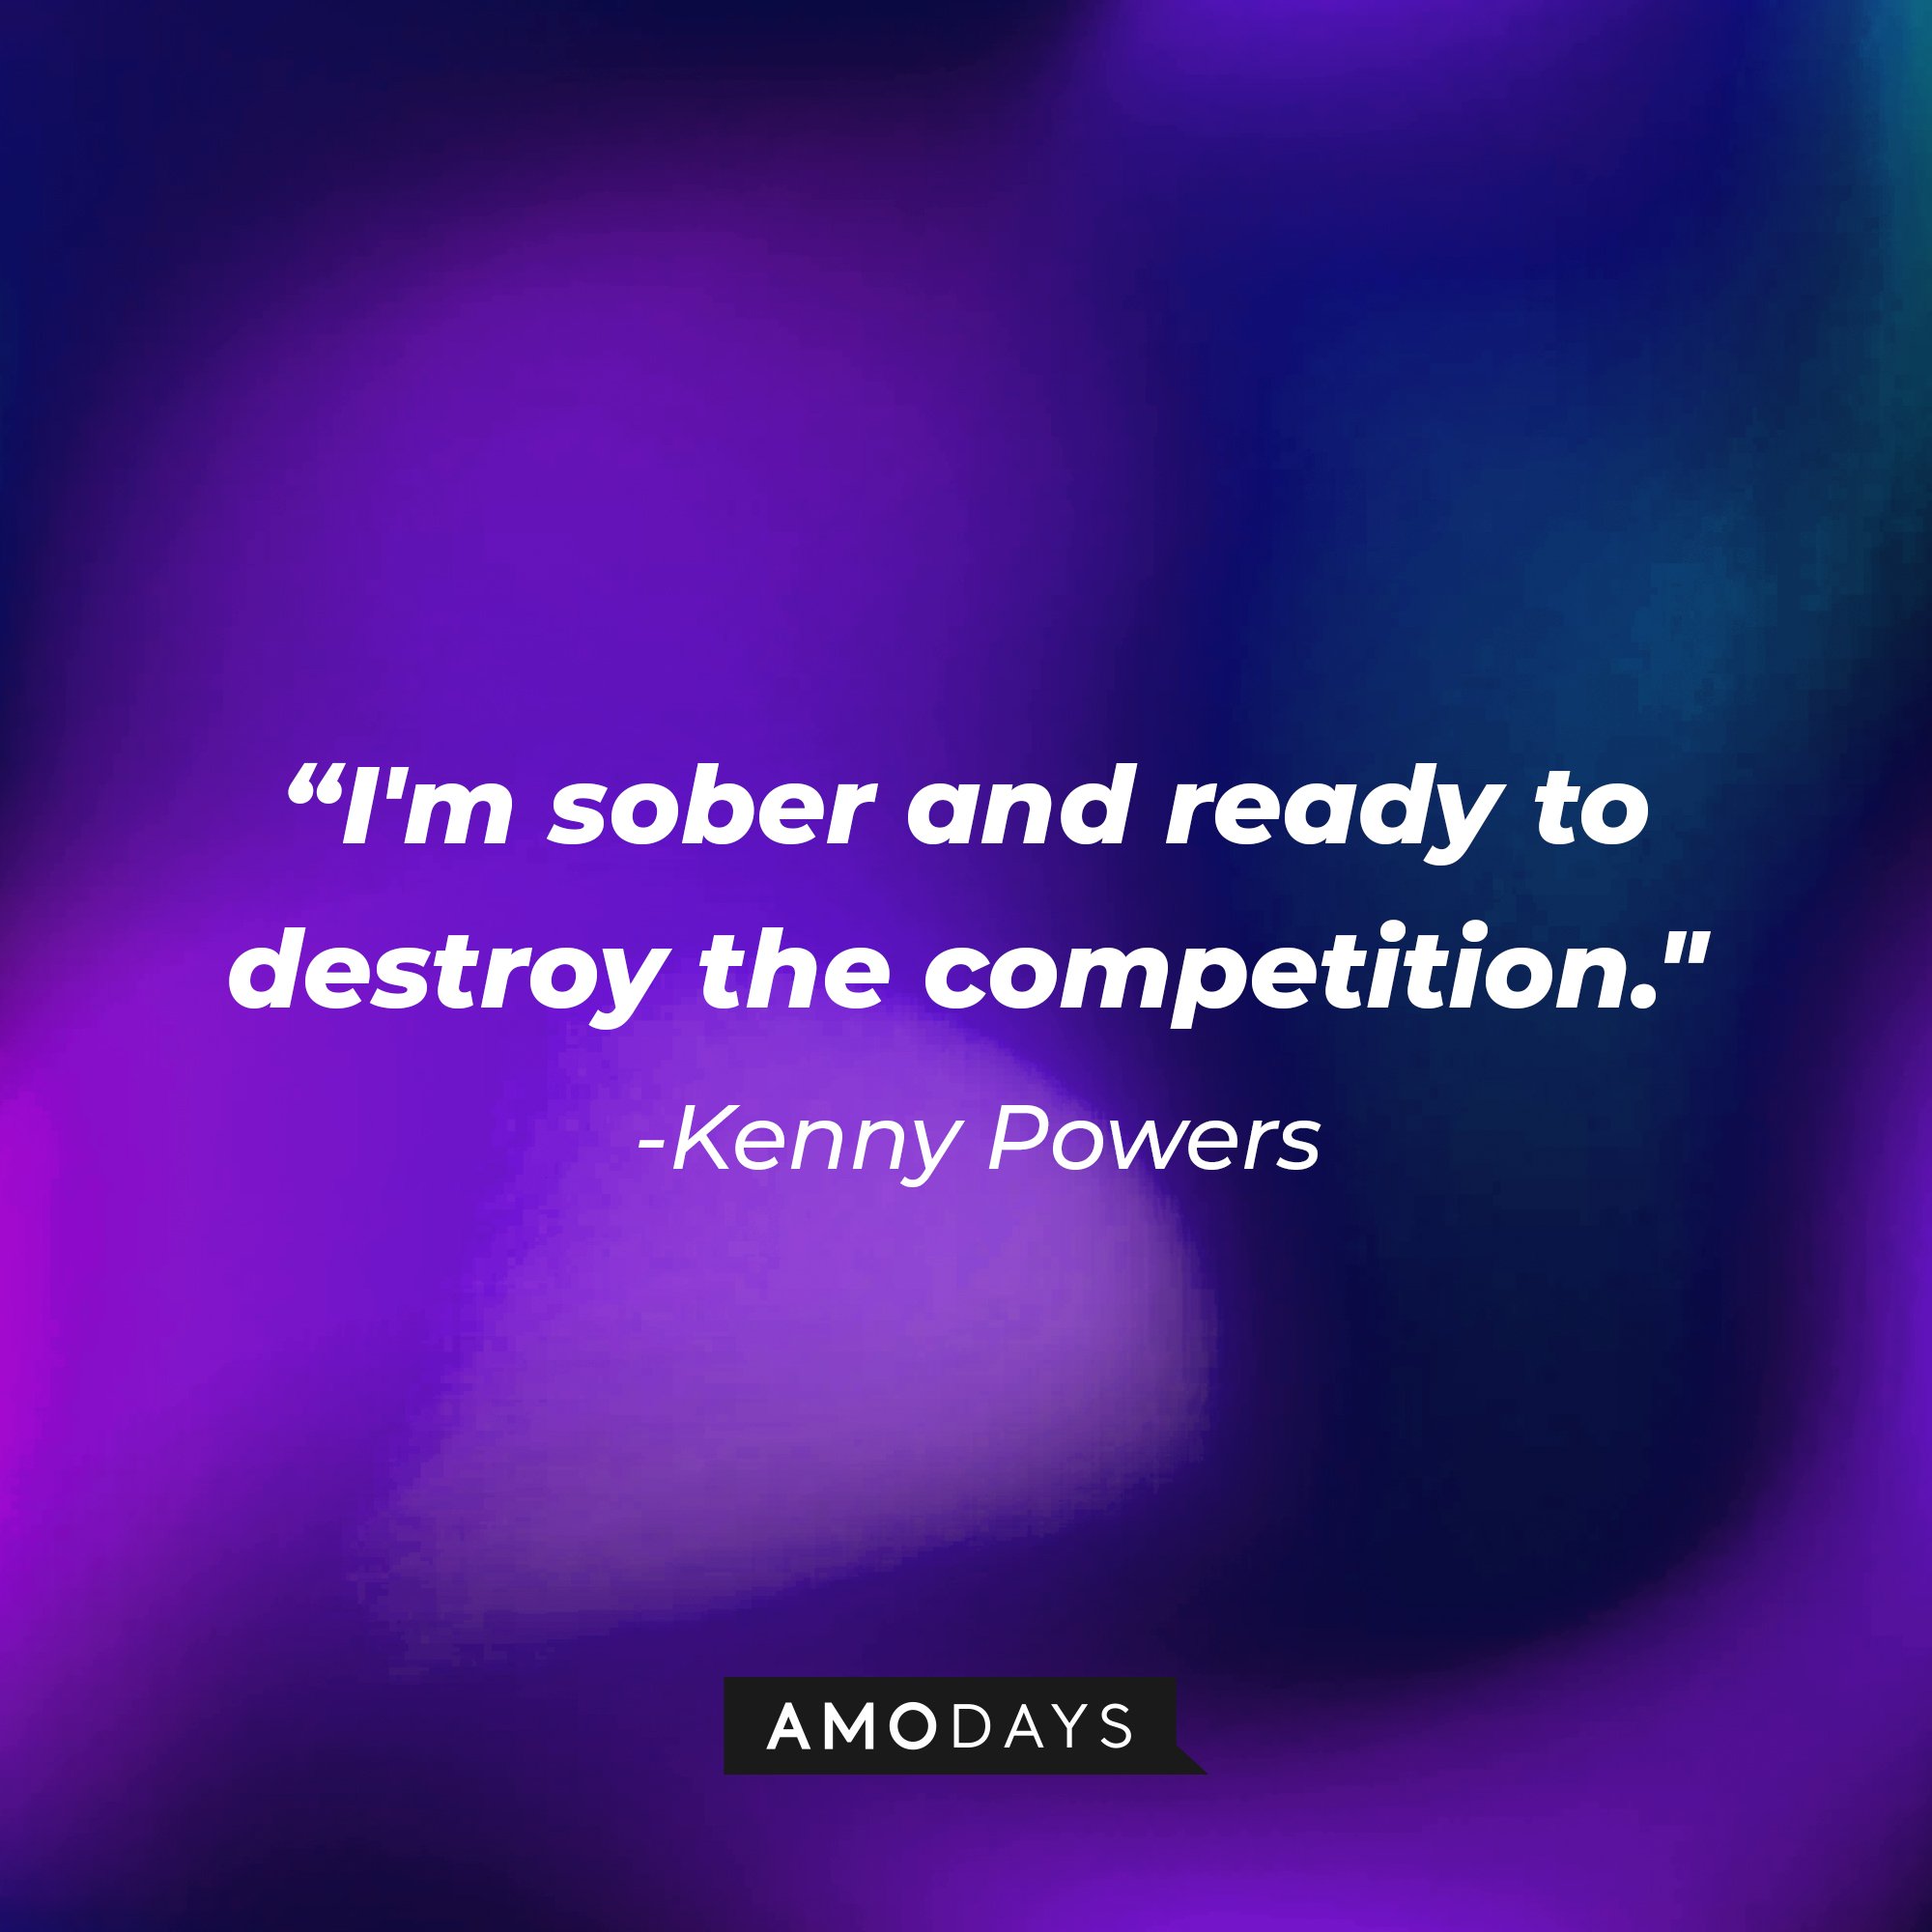 Kenny Powers' quote: “I'm sober and ready to destroy the competition.” | Image: AmoDays